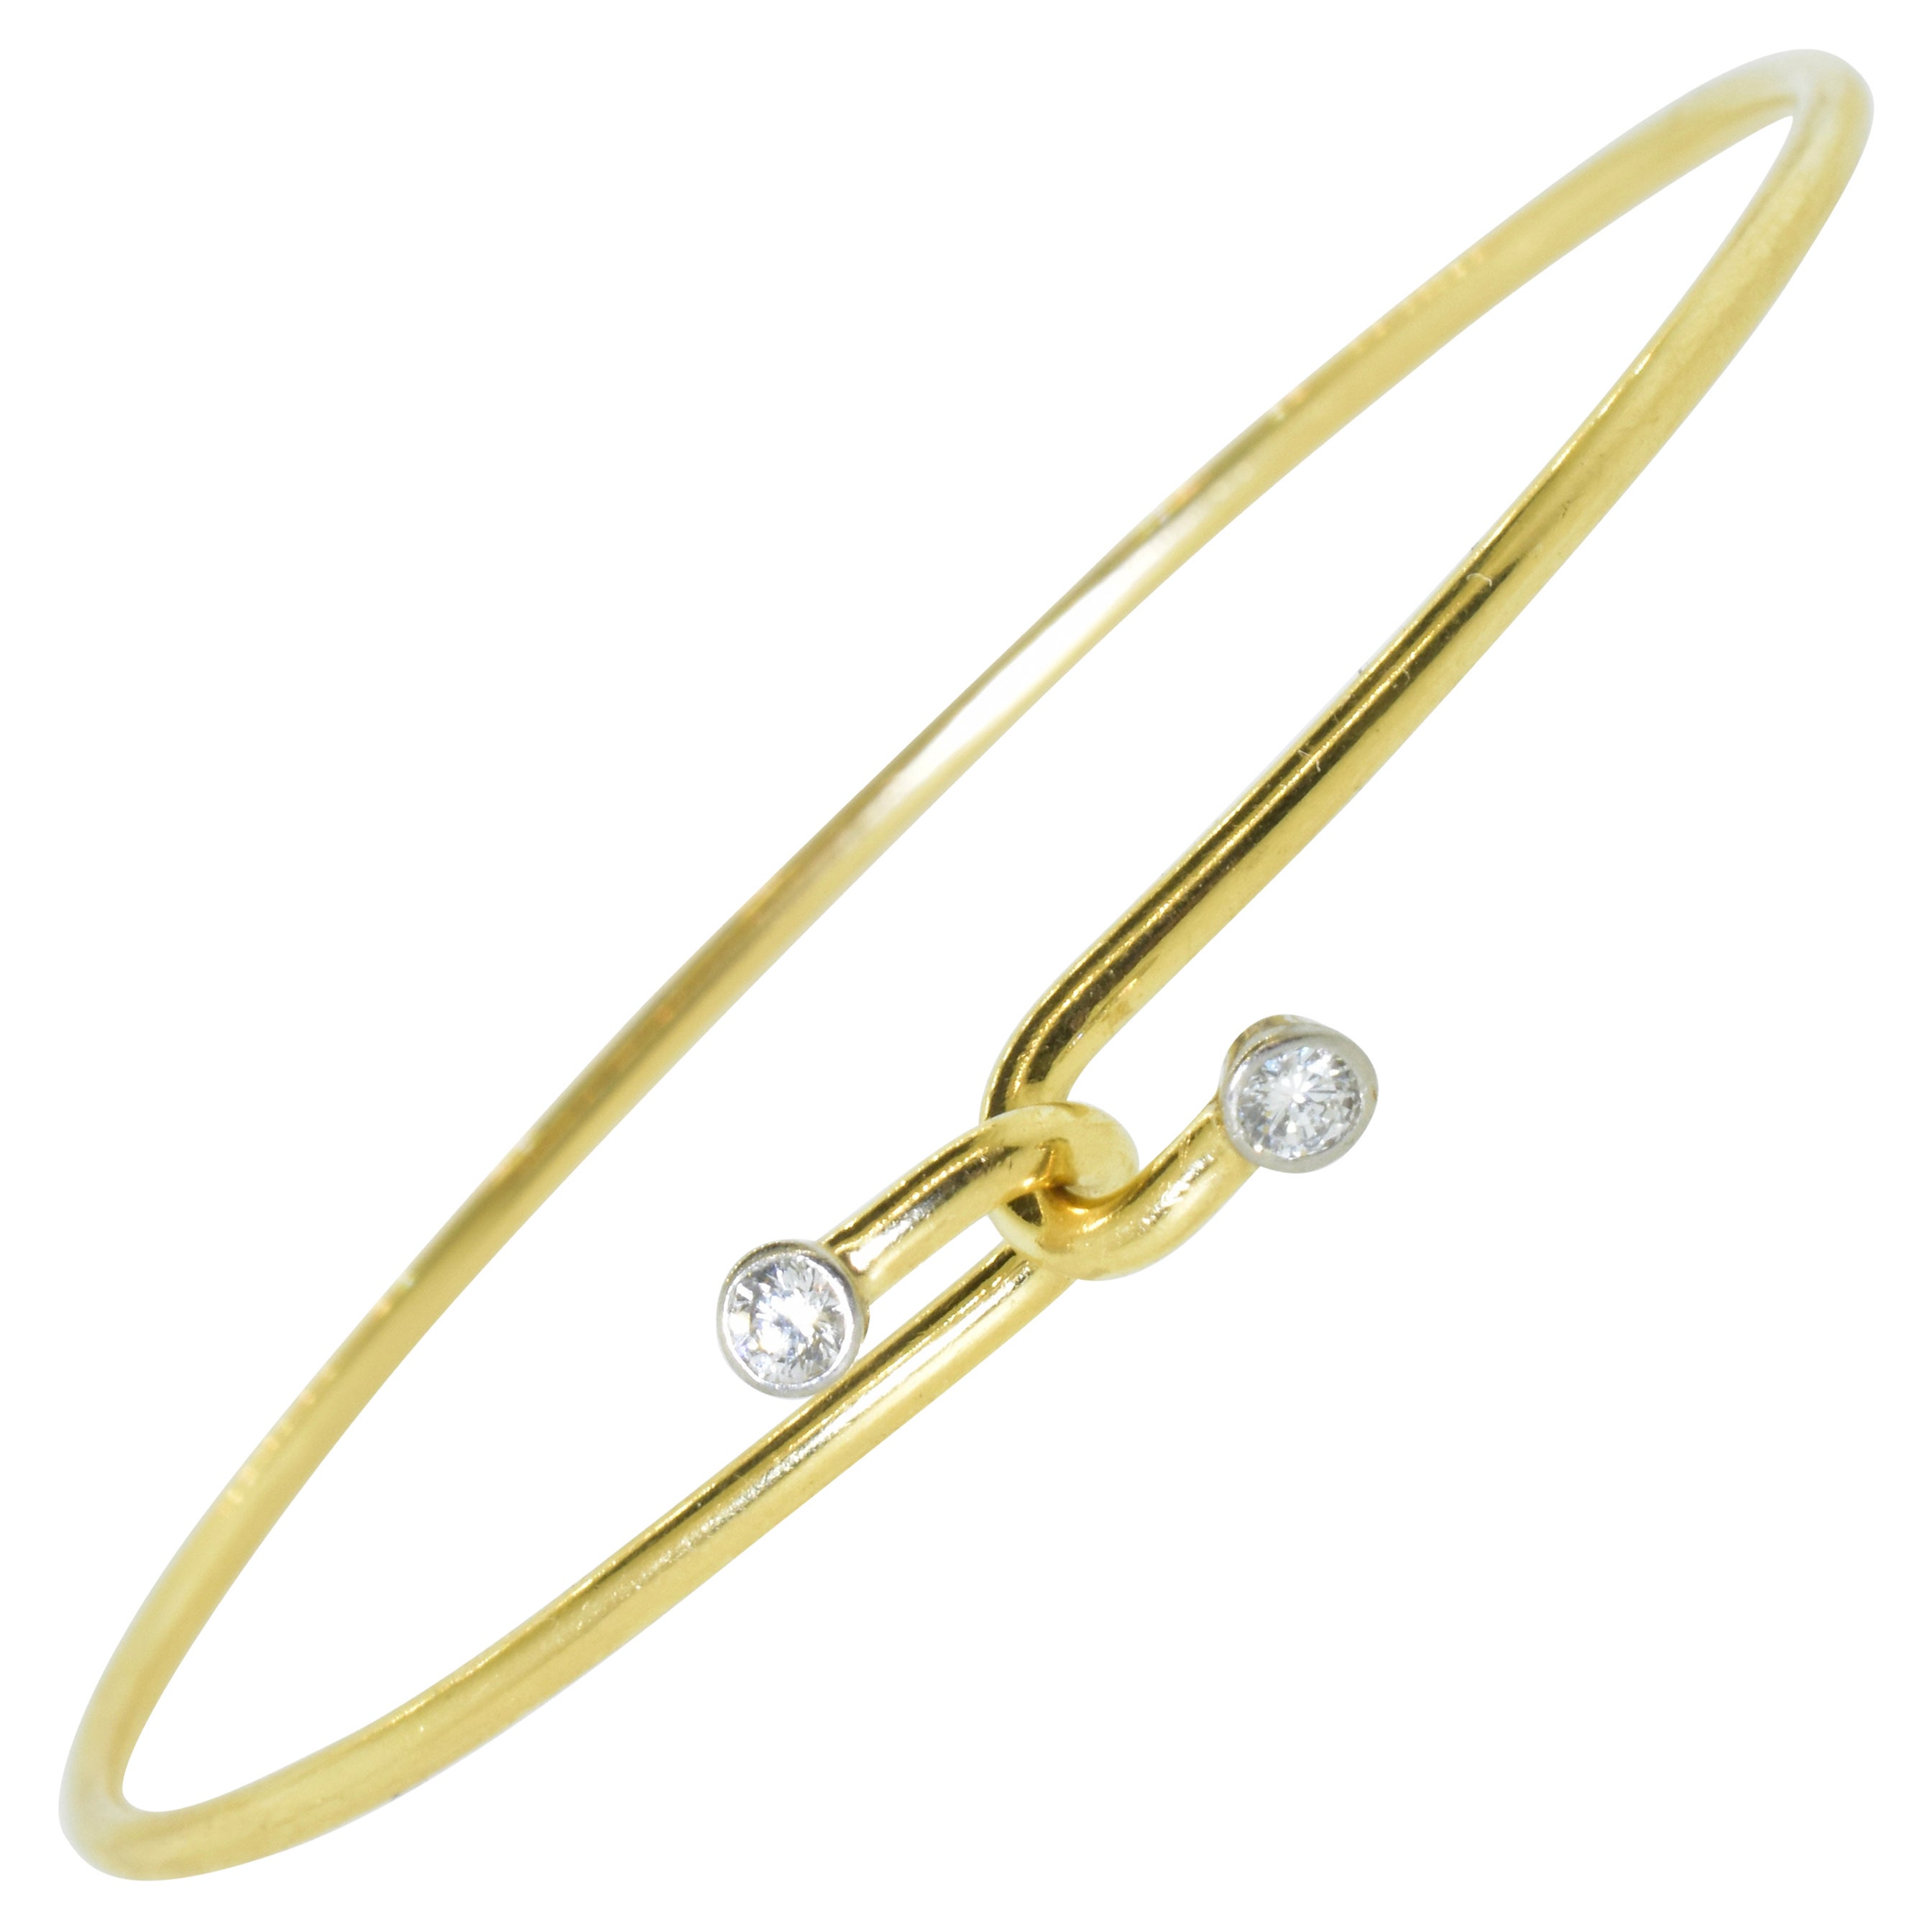 Tiffany & Co. flexible bracelet centering two diamonds, this 14K yellow gold and platinum bracelet is easy to wear.  It has a by-pass clasp with a diamond on each side of the interlock front clasp.  The bracelet consists of gold wire (round in cross